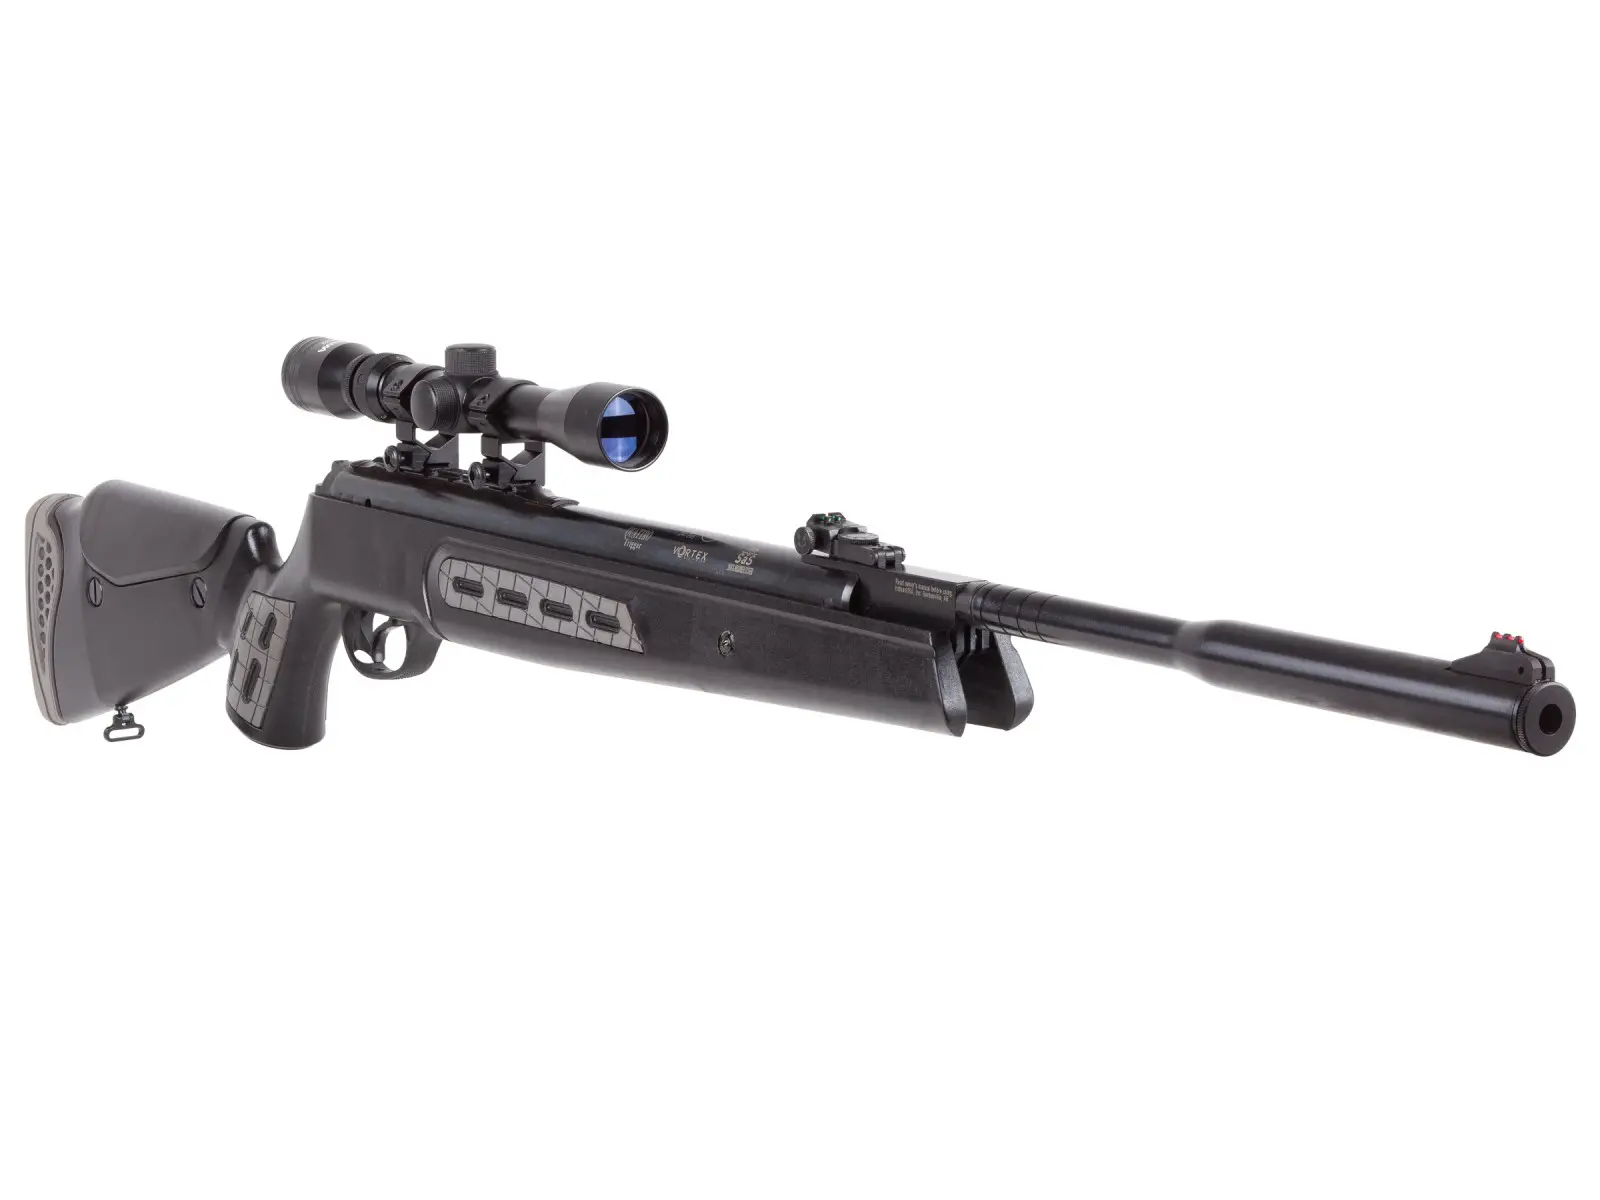 125 Best Break Barrel Air Rifle That Hits Like A Champ (Reviews and Buying Guide 2023)